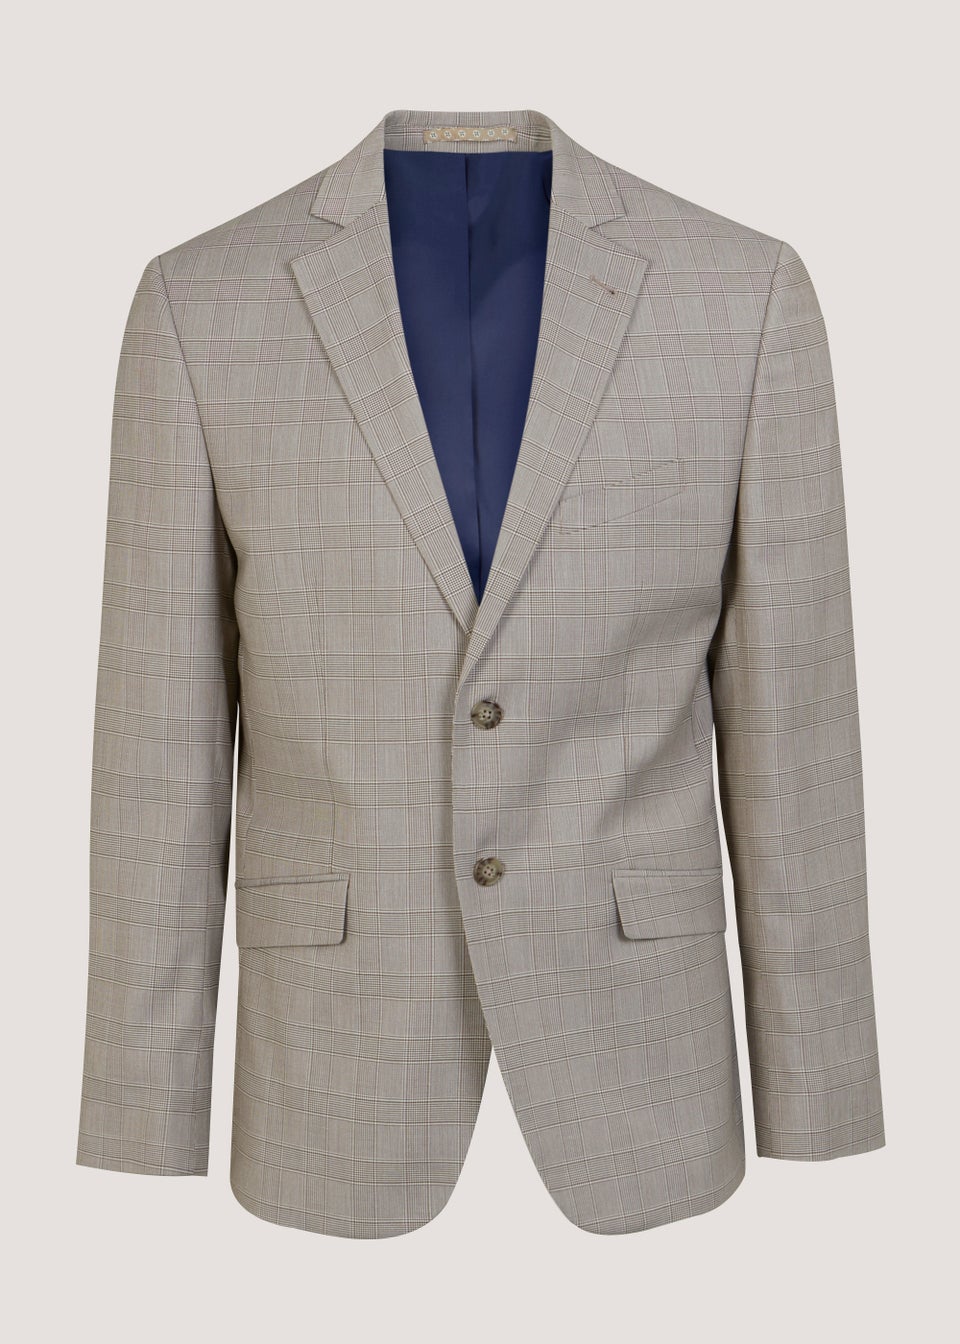 Taylor & Wright Gibson Brown Slim Fit Suit Jacket